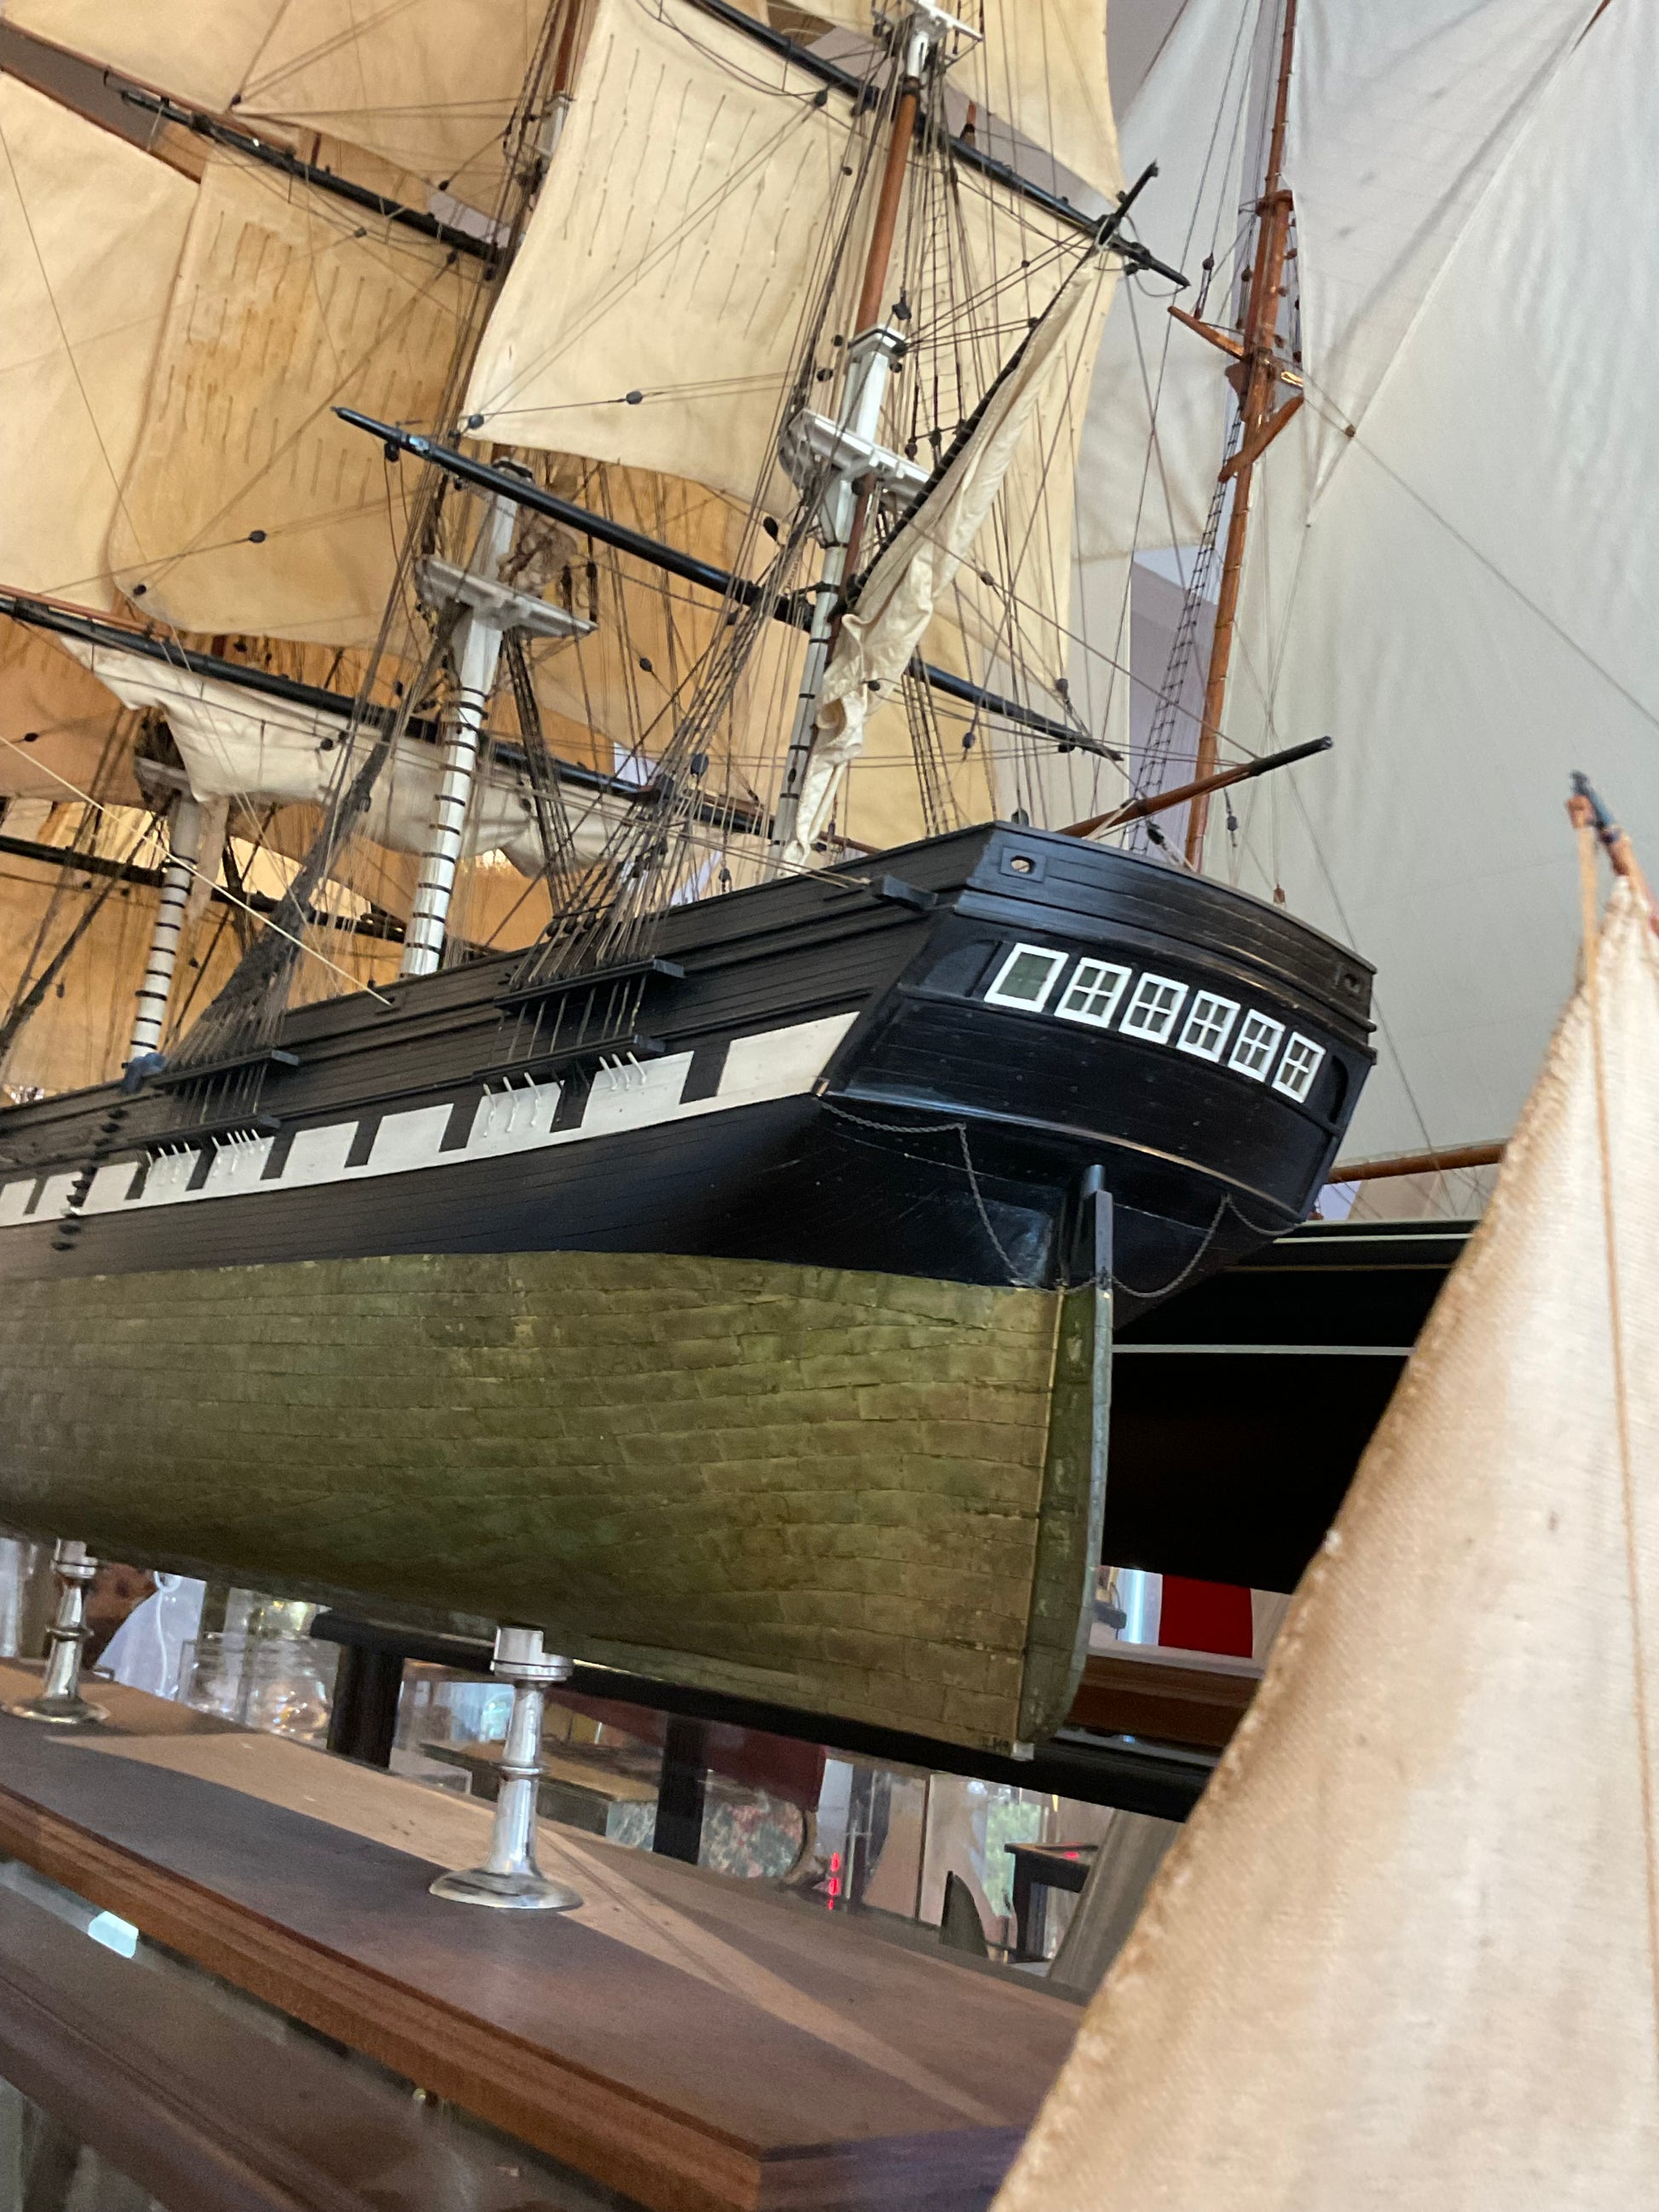 Spectacular Model of the Packet Ship Issac Webb - Lannan Gallery